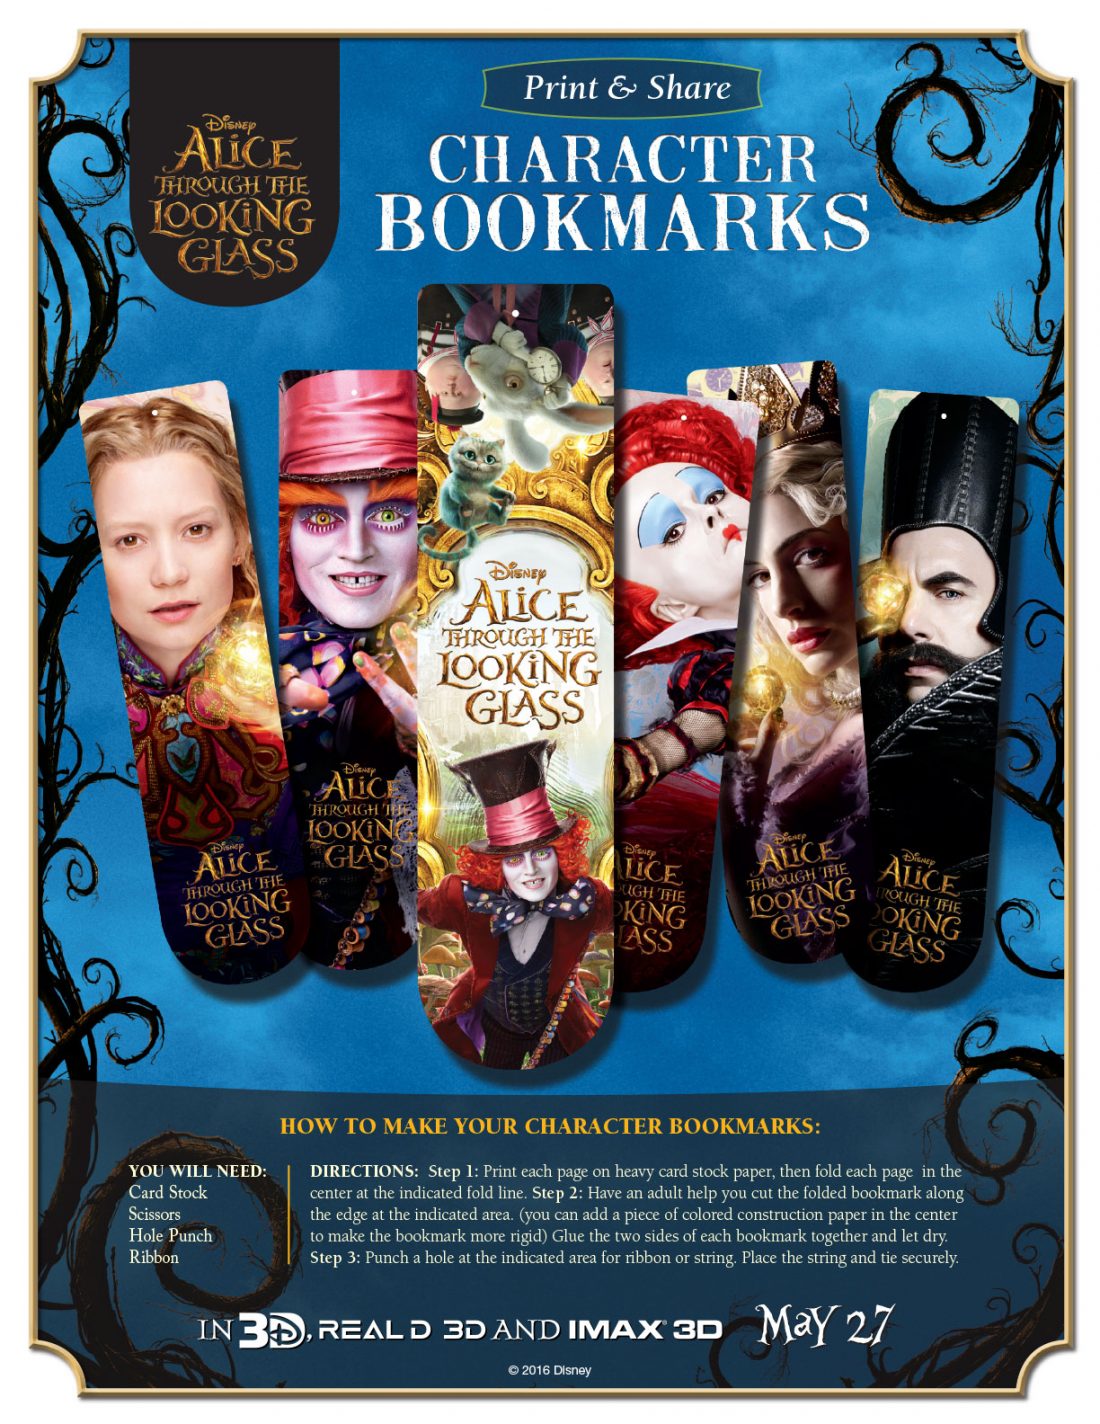 AliceThroughTheLookingGlass573b9d4b7a327